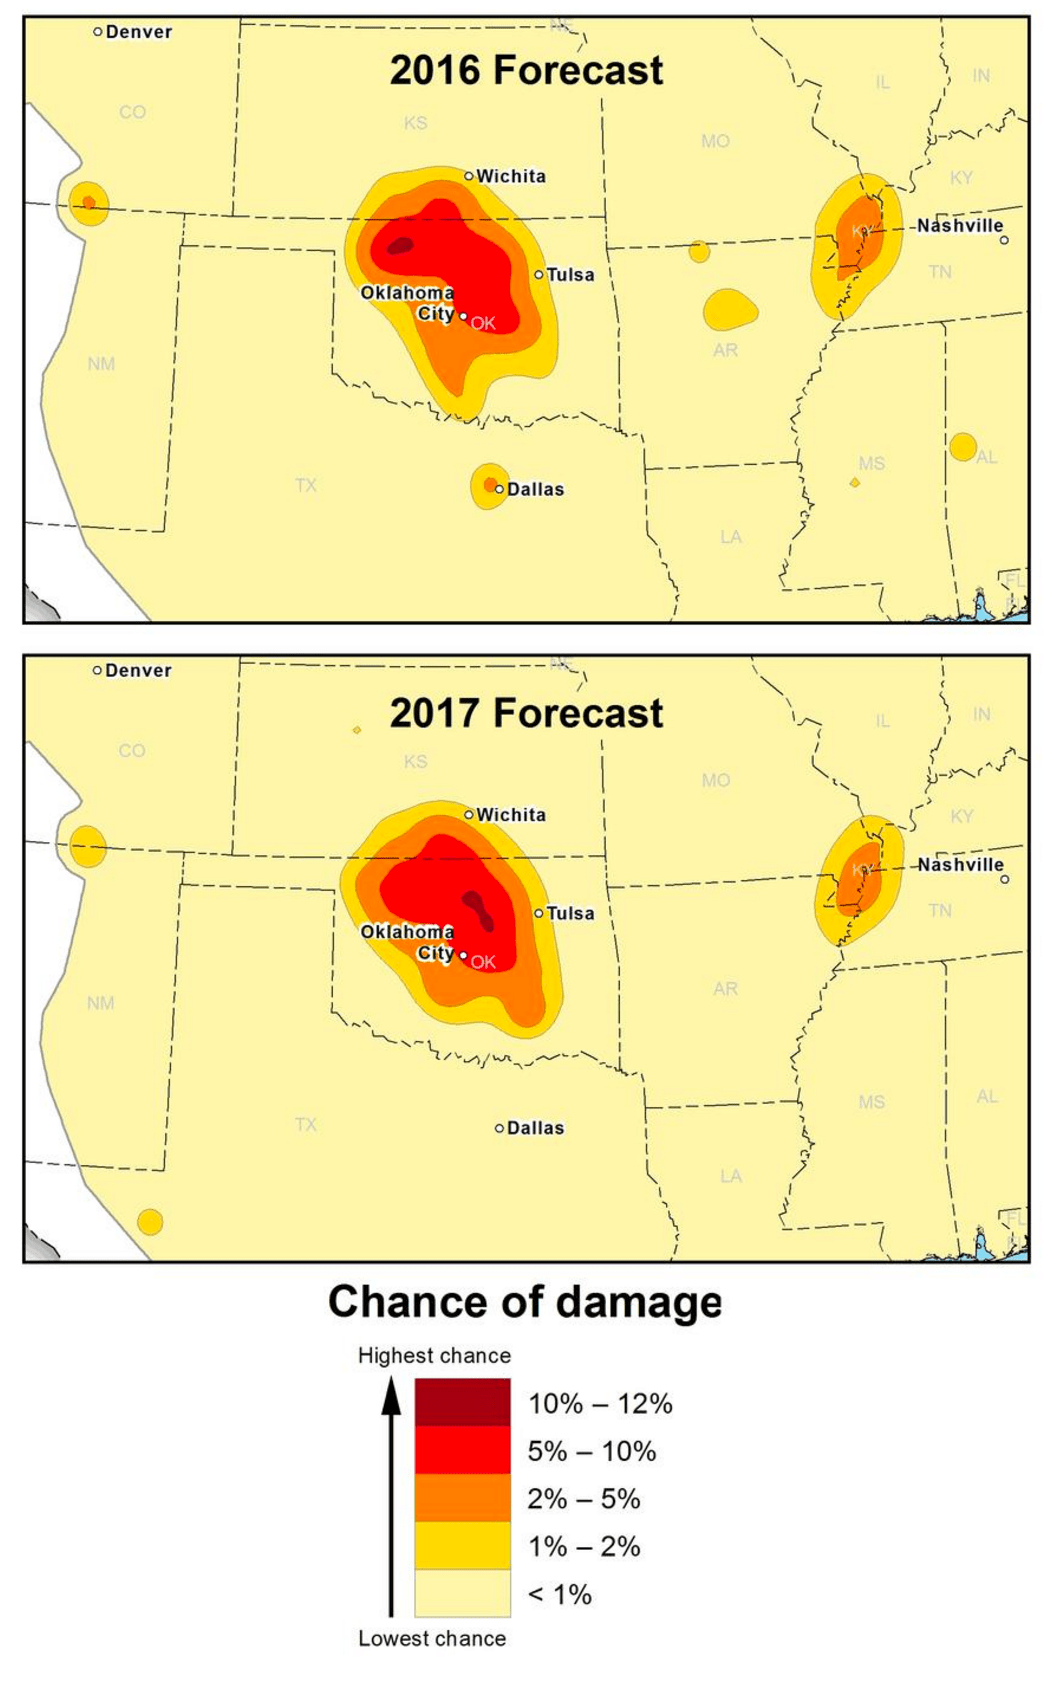 Here’s Where Americans Can Expect Earthquakes To Cause The Most Damage In 2017